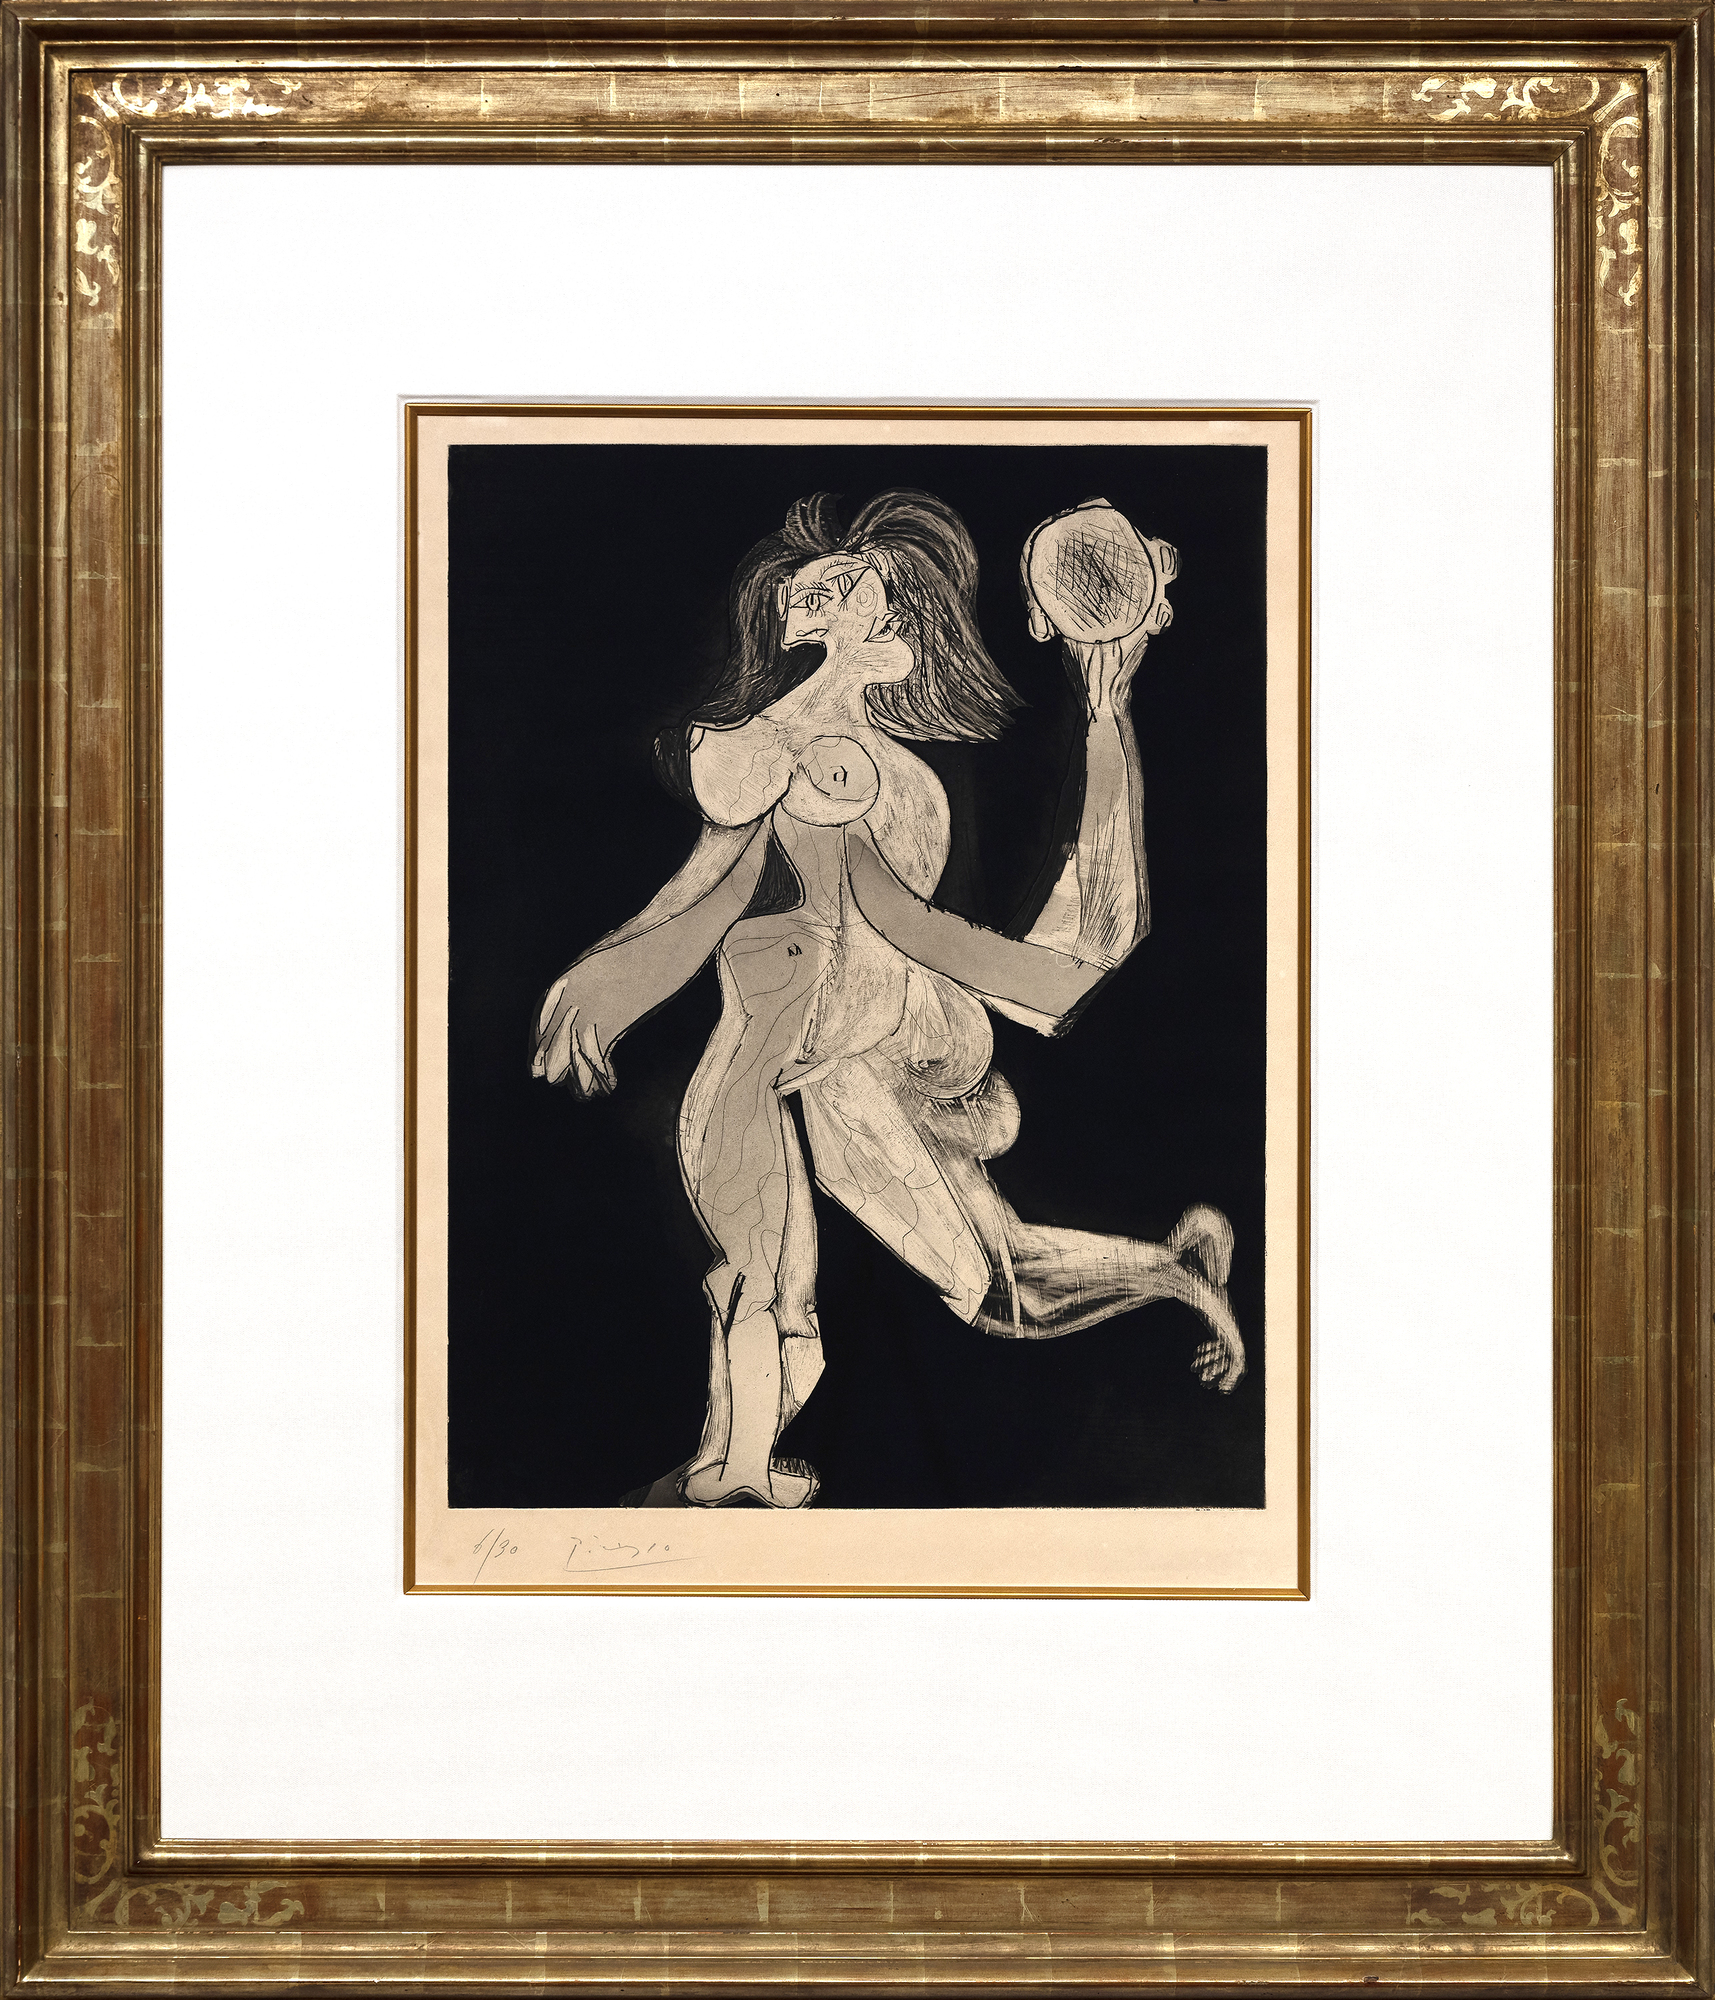 "La femme au tambourin" (1939) is one of Pablo Picasso’s greatest graphic works. Partially based on compositions by Degas and Poussin, the work exudes a strong Classical presence with a Modernist edge. Thought to be a depiction of Dora Maar, Picasso’s lover at the time, the print is highly coveted by institutional and private collectors. One impression from this edition is included in the permanent collection of the Museum of Modern Art, New York, and another is included in the National Gallery of Art, Washington, D.C.<br><br>Picasso’s experimentations in printmaking began in the first decade of the 20th century and engaged him for many decades, into the 1970s. In this time, Picasso embraced multiple methods of printmaking, including lithography, etching, aquatint, and linoleum block printing. His earliest prints were, like the present work, intaglio. With La femme au tambourin, Picasso incorporated the additional medium of aquatint, which yielded a watercolor-like effect throughout the composition and an extreme range of tonal qualities. This technique in particular afforded opportunities for expression that could not be found in painting. For his experimental reach and depth of mastery, Picasso’s corpus of graphic work is among the most highly respected and coveted in the history of art, rivaling that of Rembrandt.